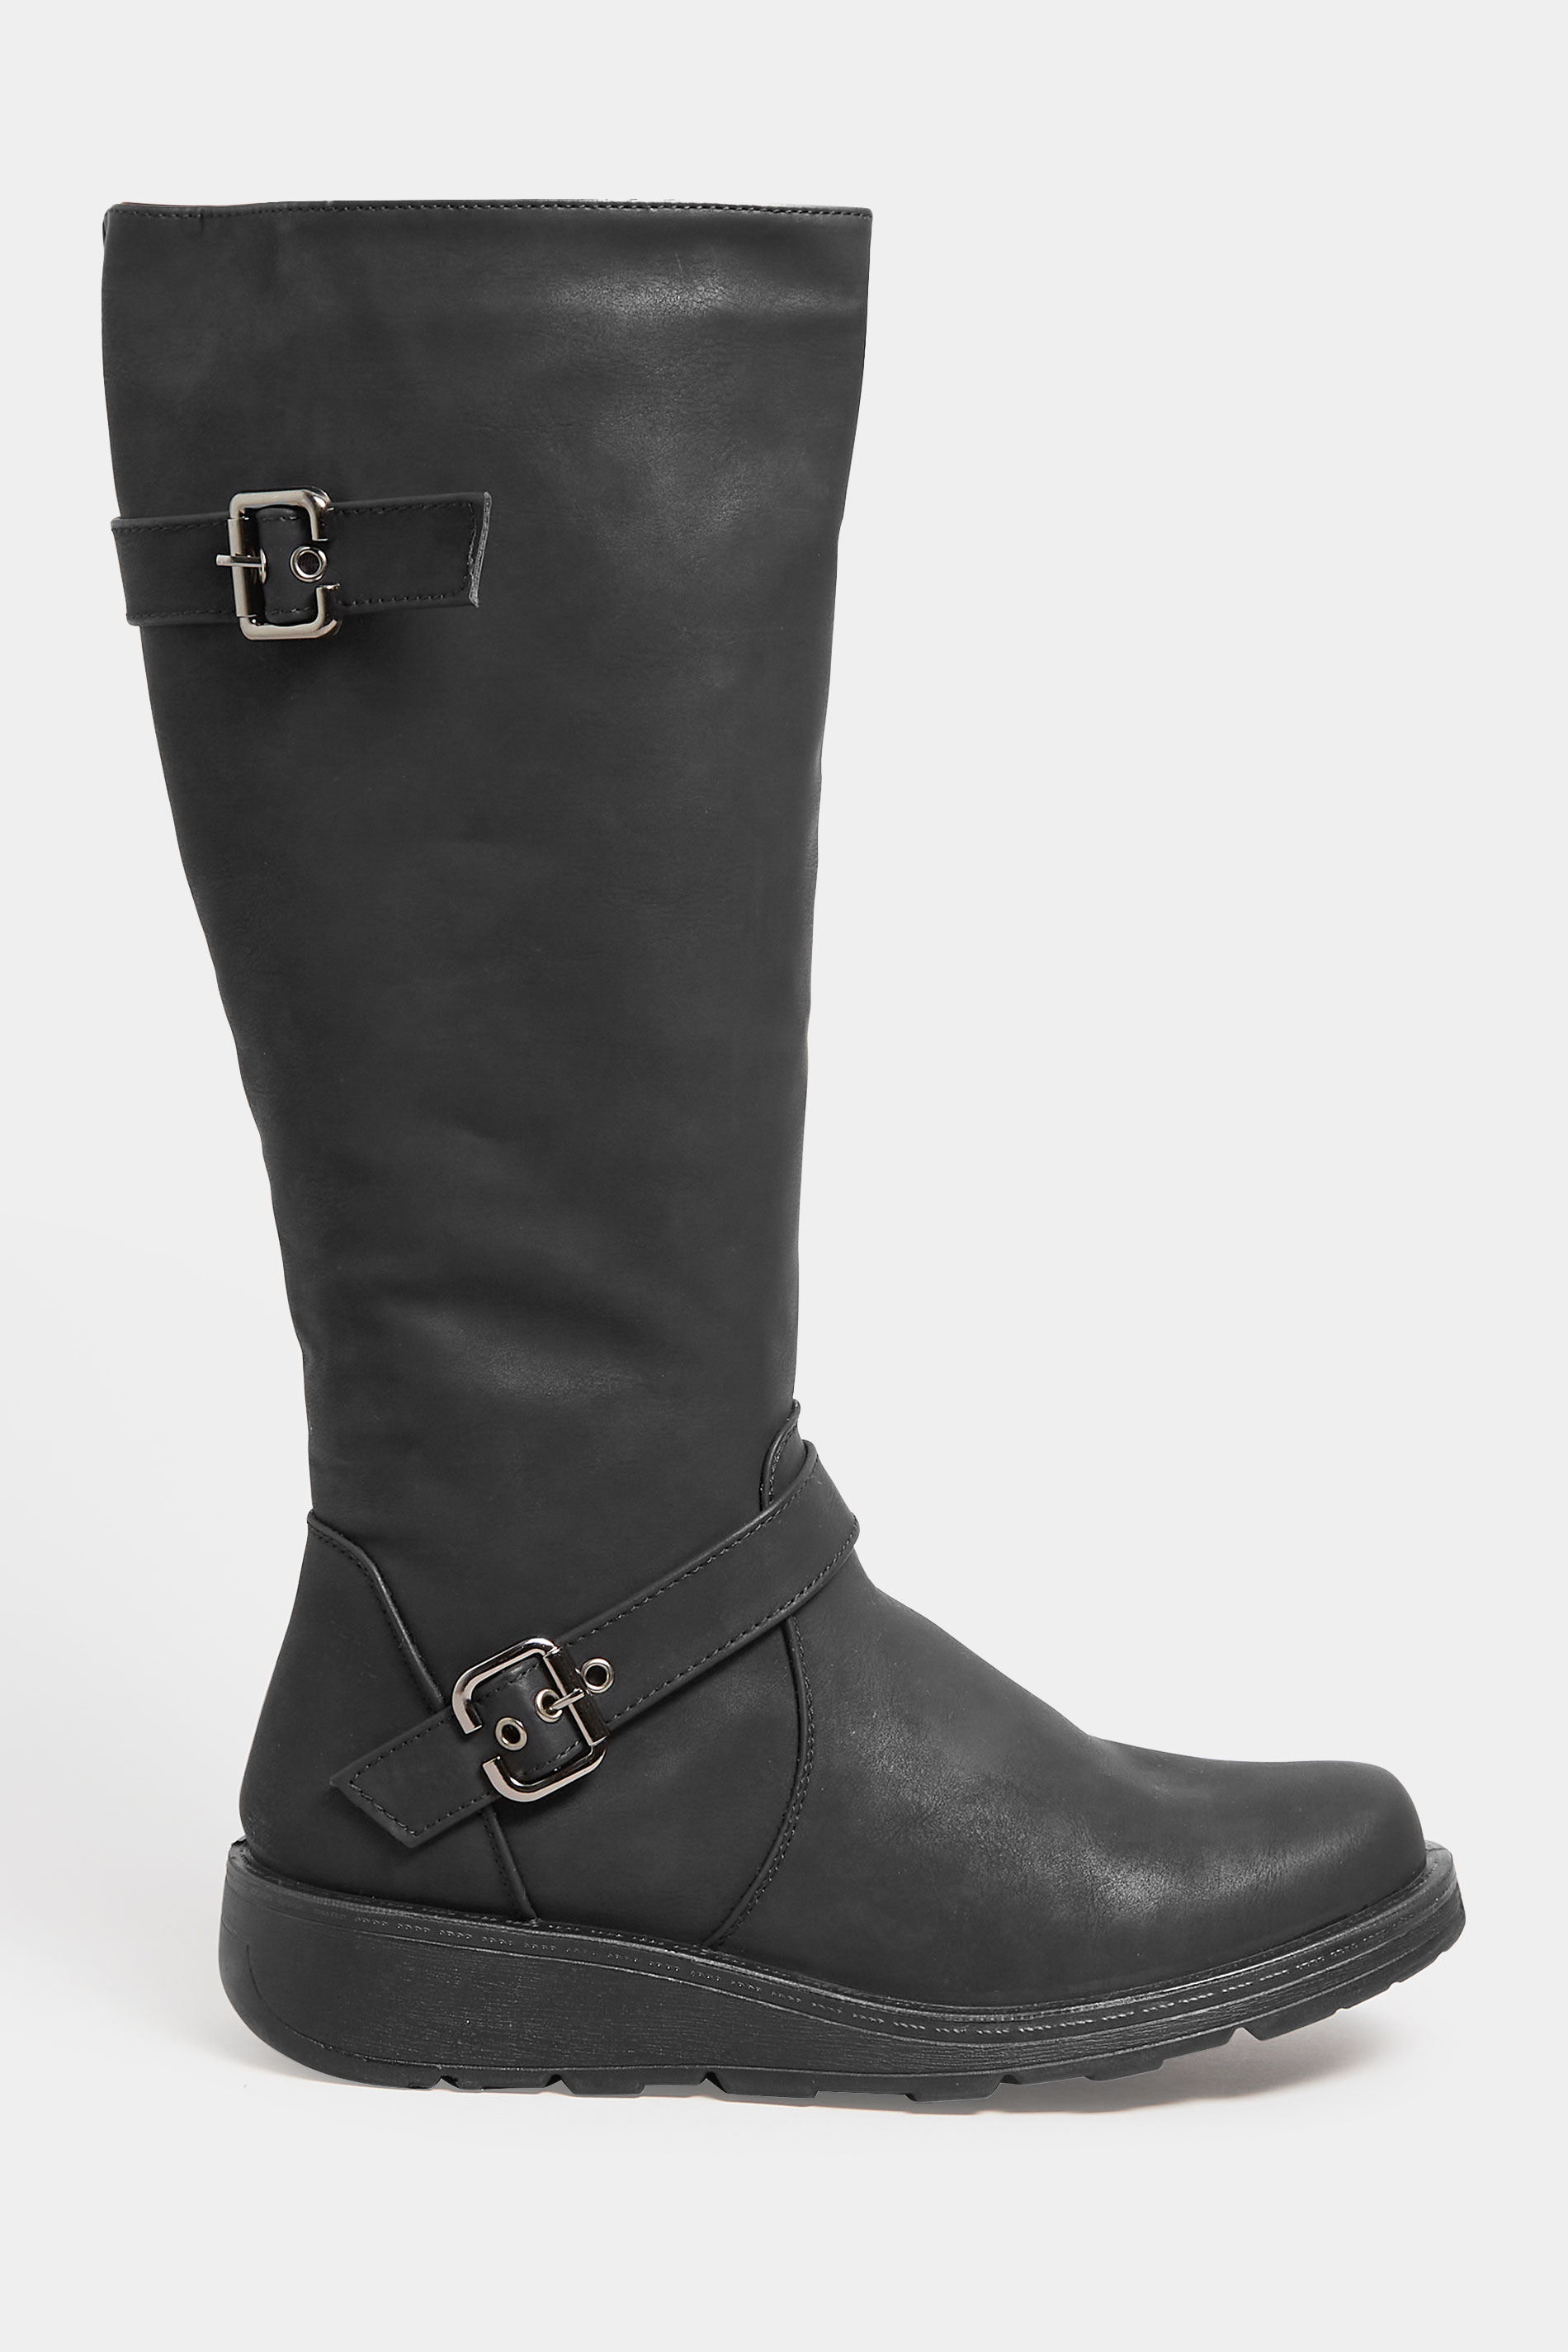 Black Knee High Wedge Boots In Wide E Fit | Yours Clothing 3